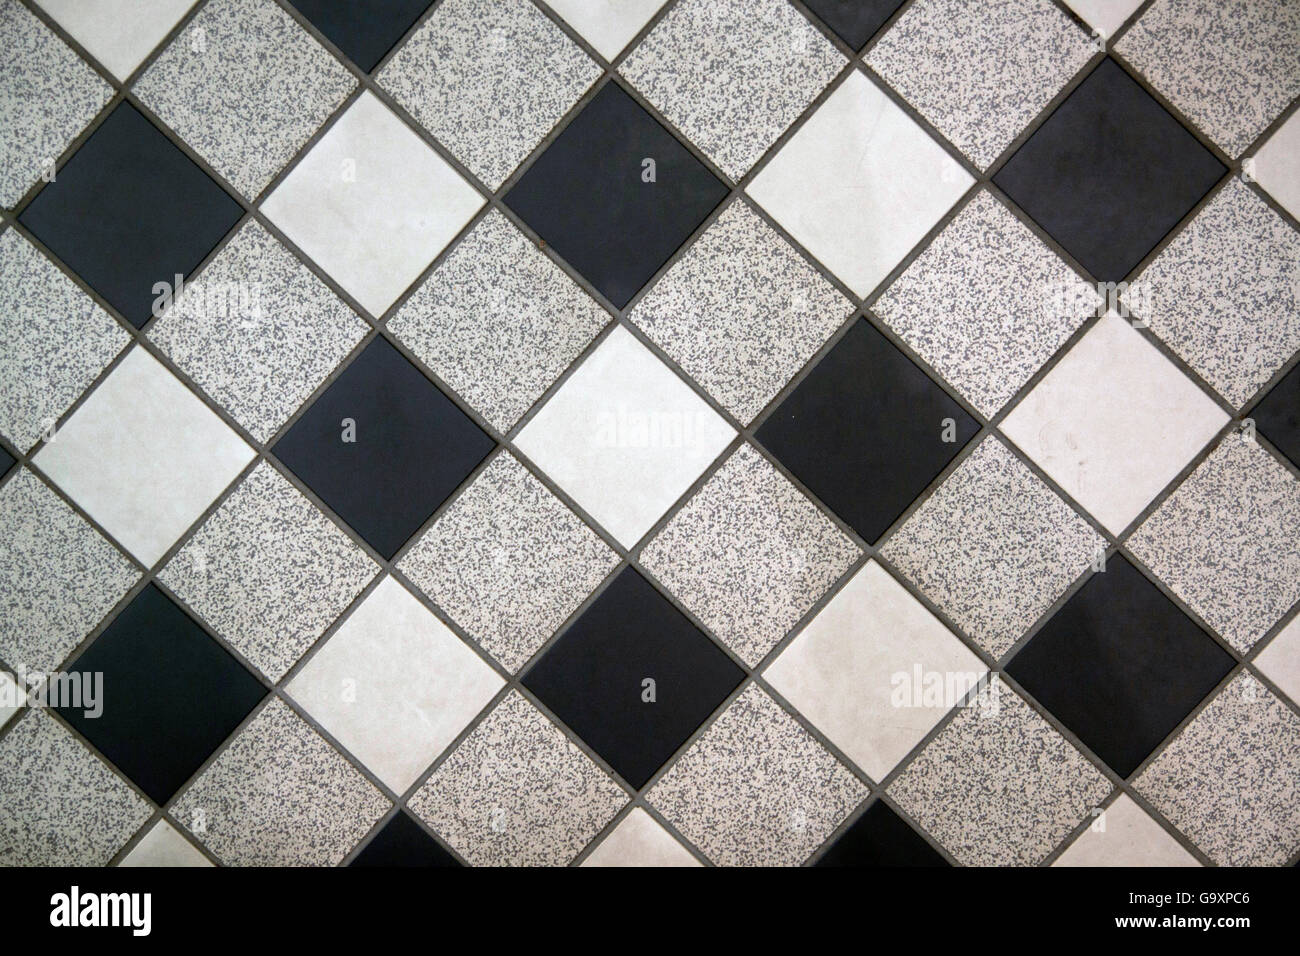 Black white and gray checkered floor tiles - Background image Stock Photo -  Alamy